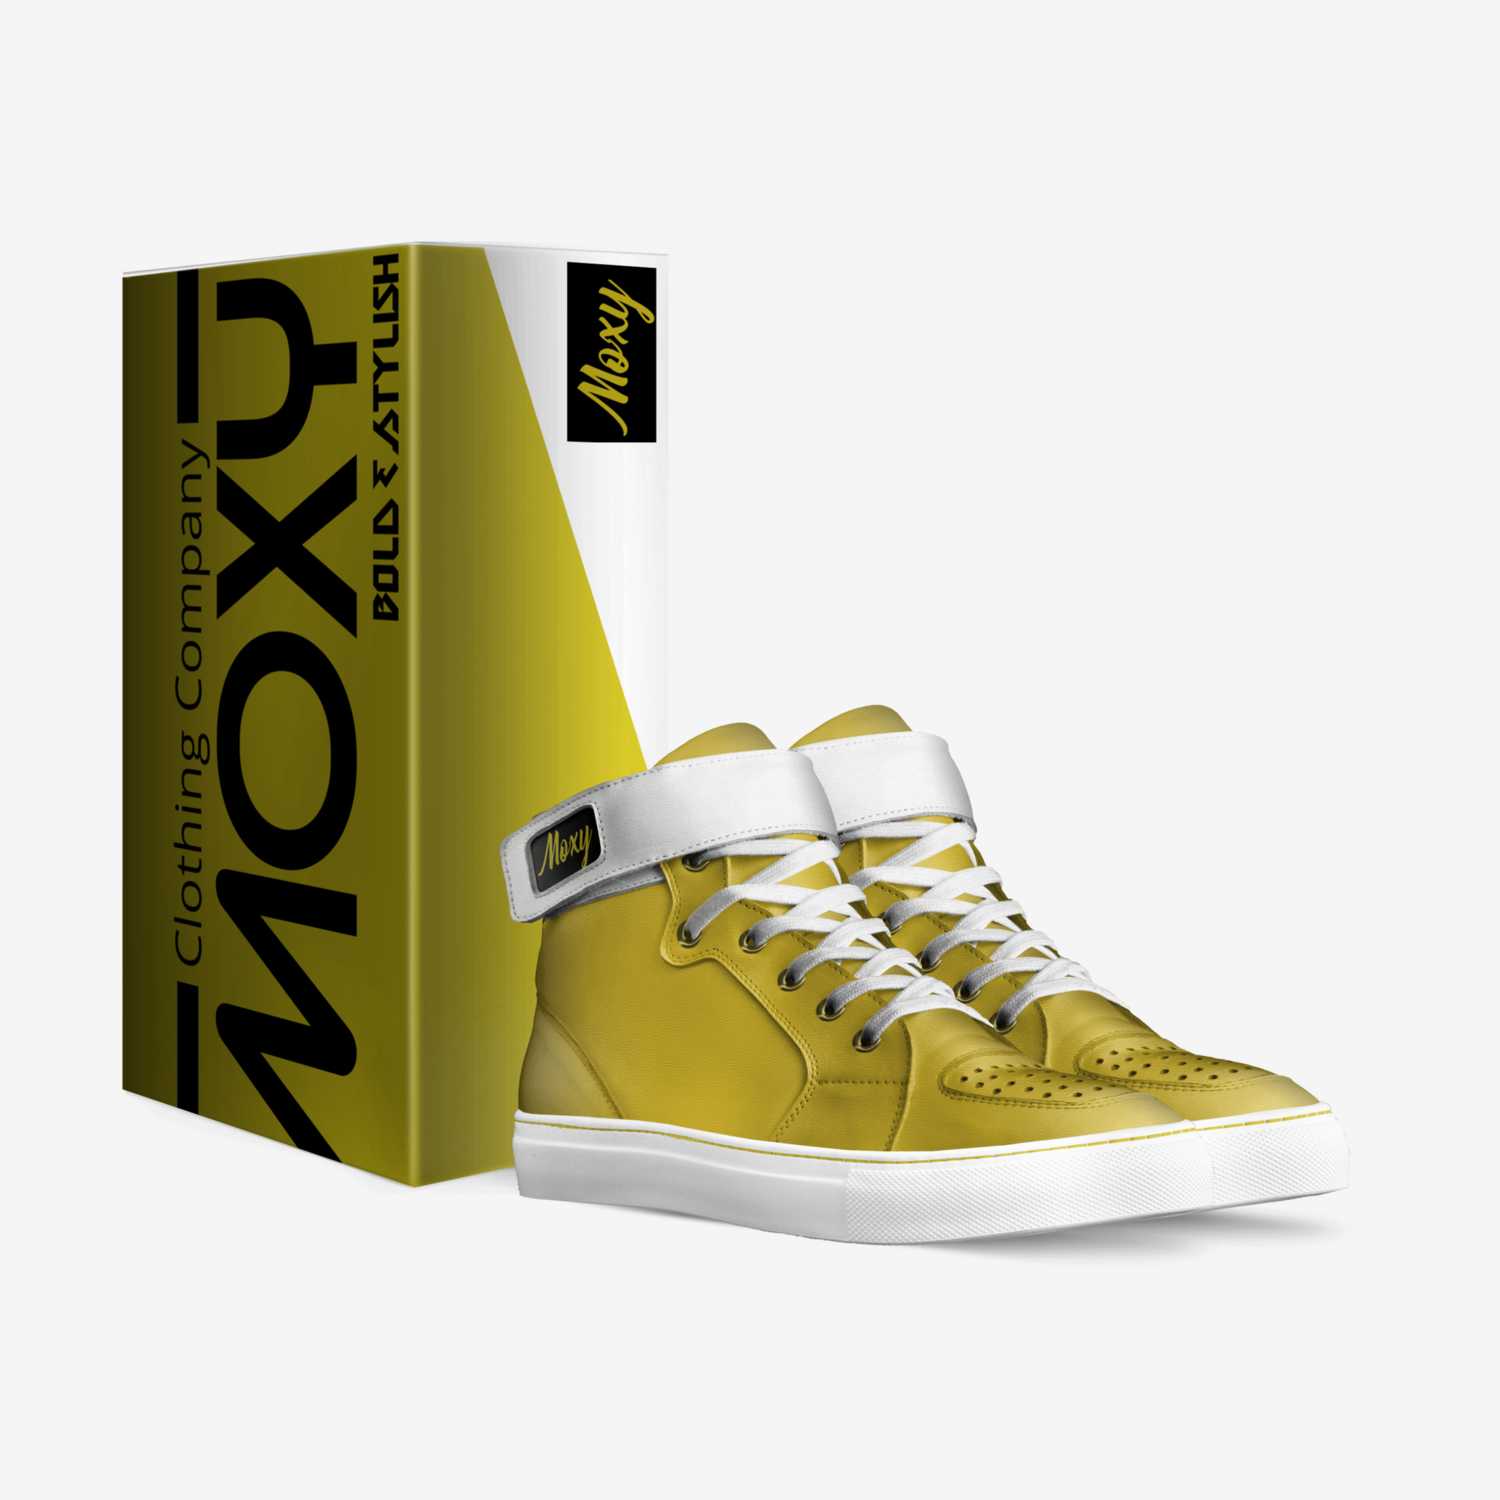 Elites canary custom made in Italy shoes by Moxy Clothing Co. | Box view